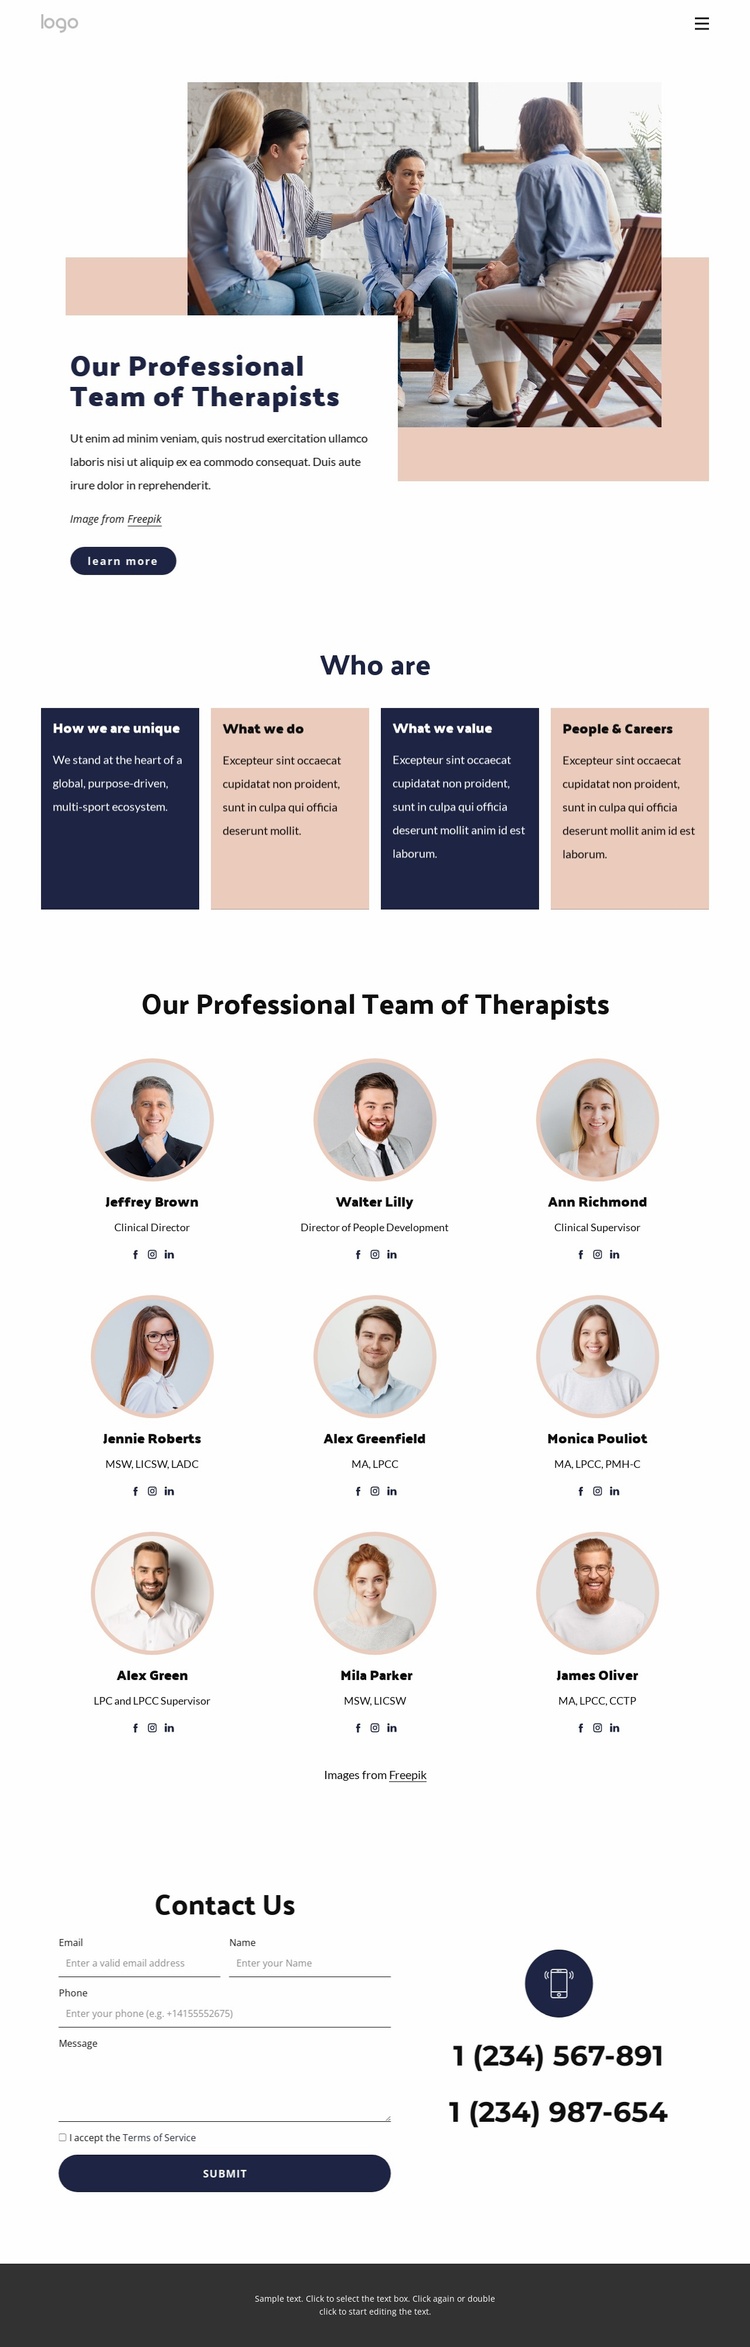 Our professional team of therapists Website Template